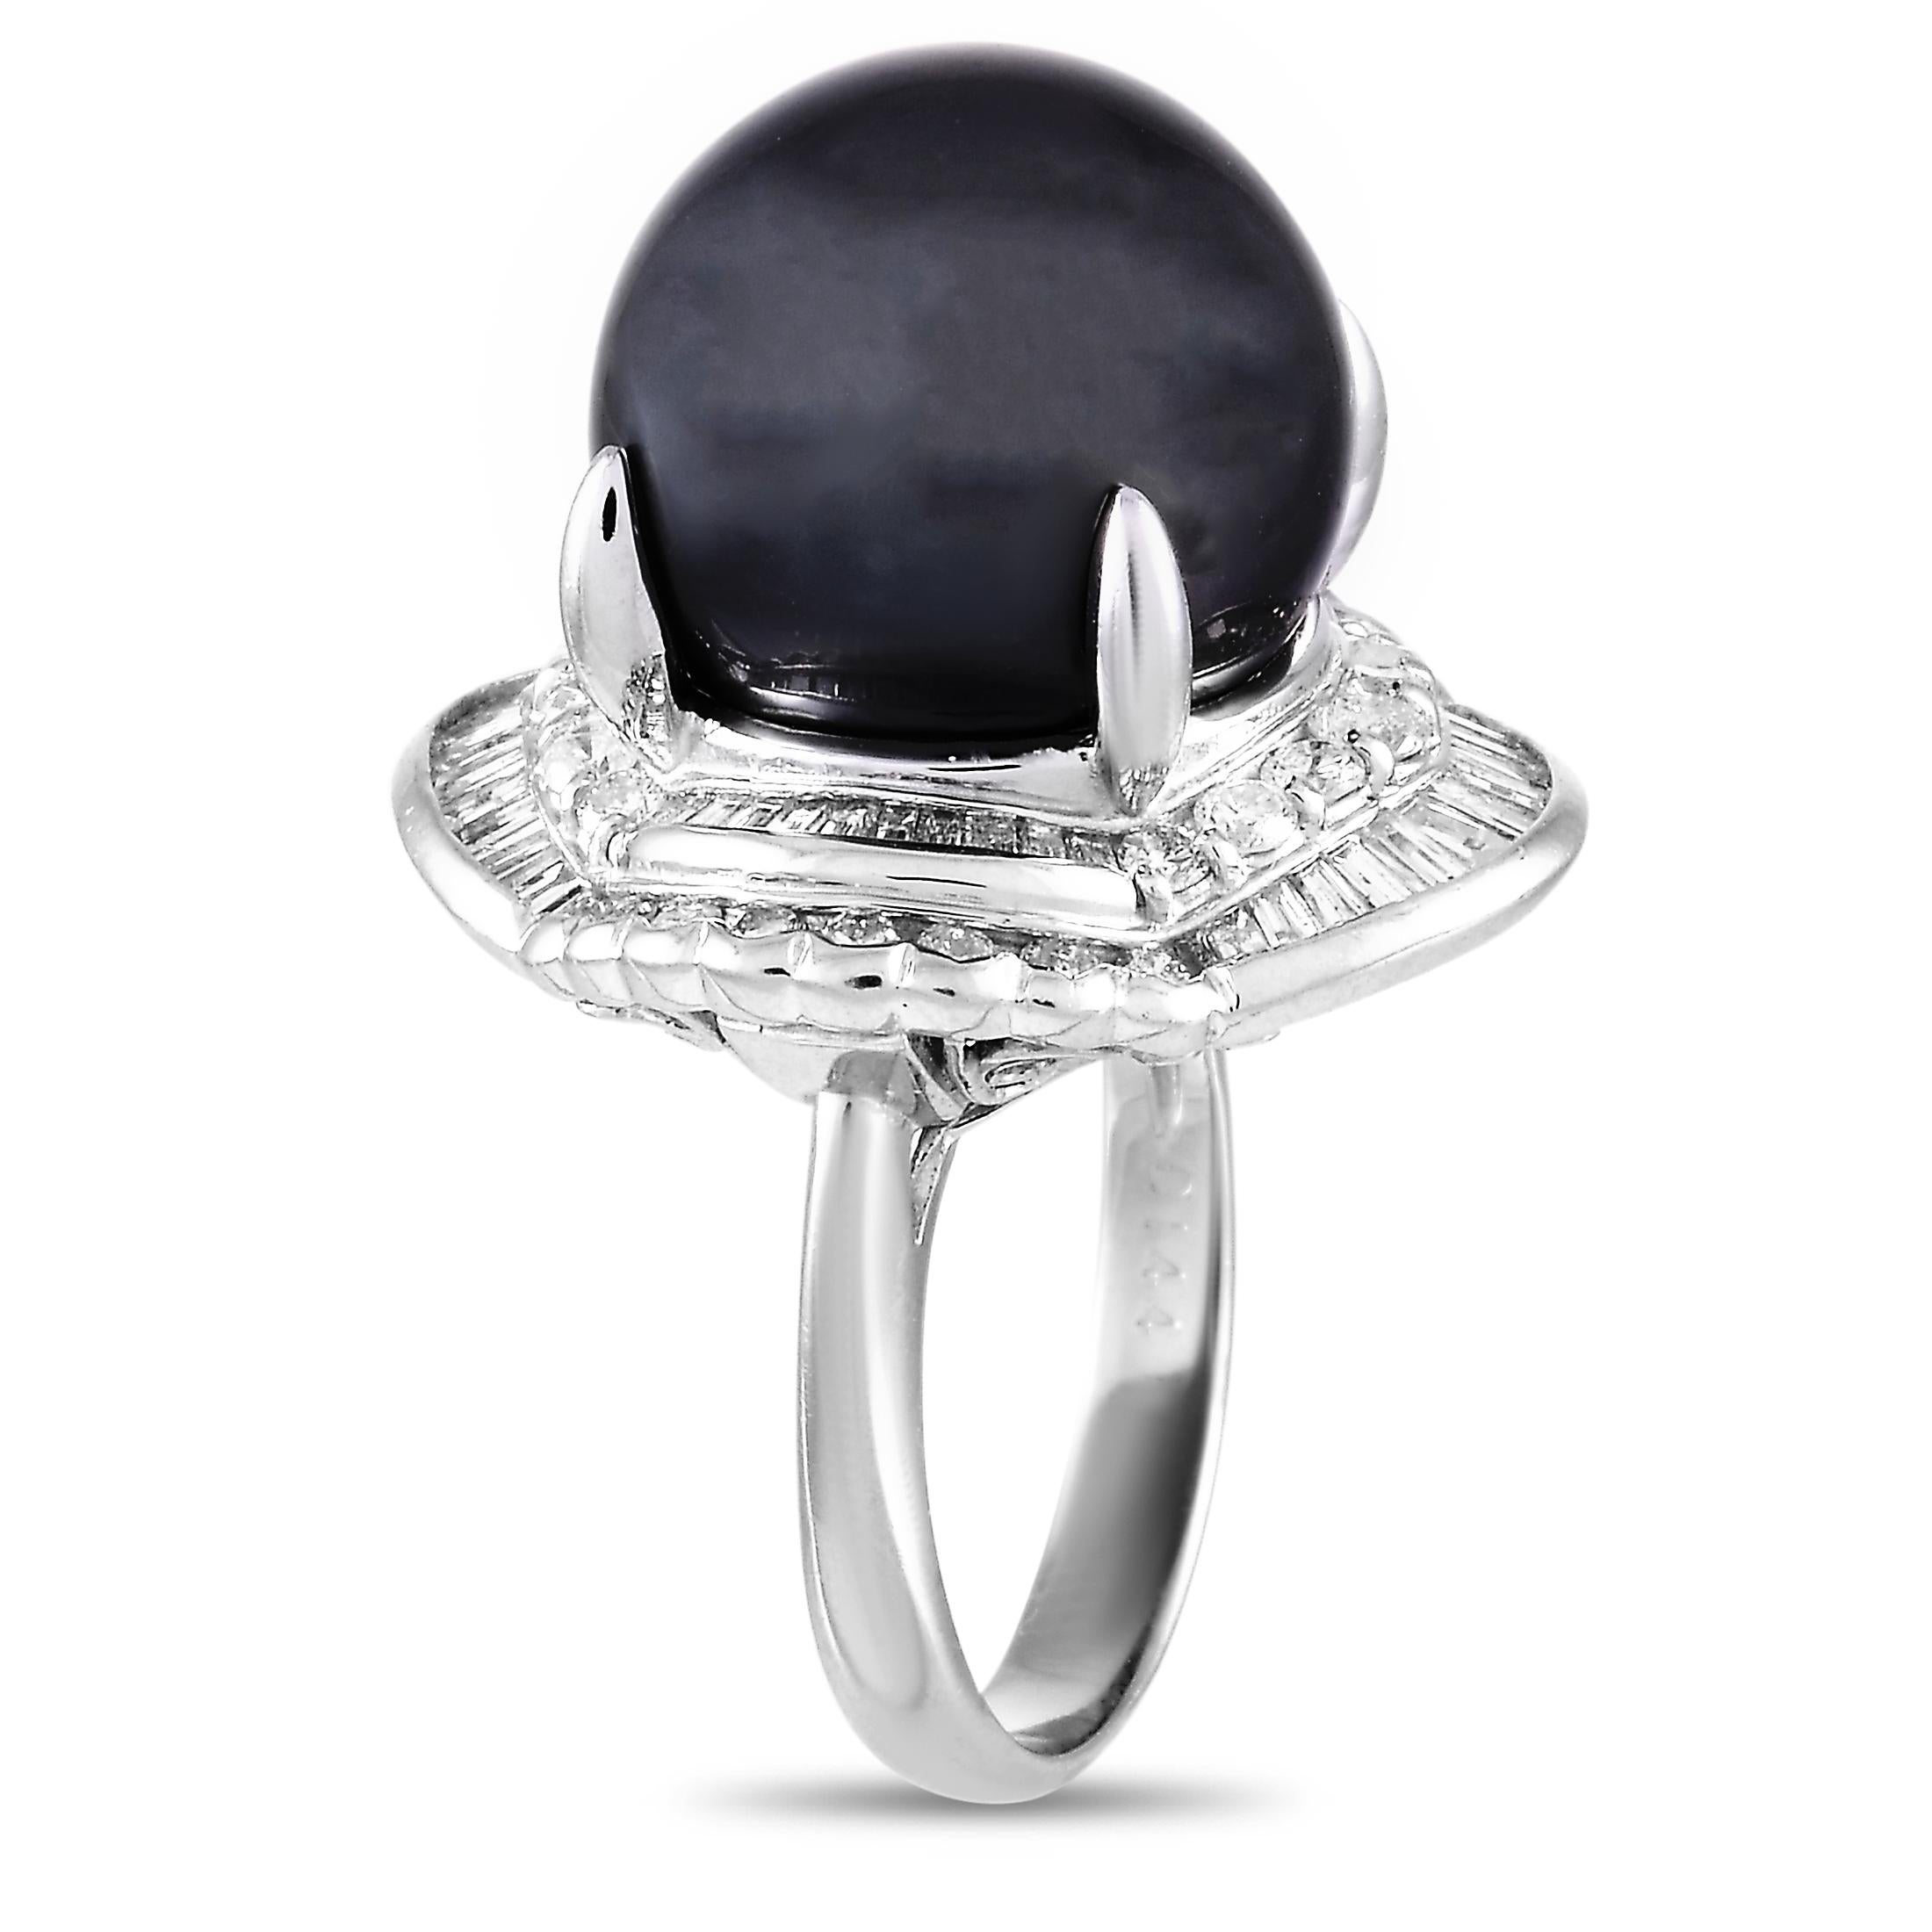 This LB Exclusive ring is made of platinum and embellished with a 14.8 mm pearl and a total of 1.44 carats of diamonds. The ring weighs 18 grams and boasts band thickness of 4 mm and top height of 18 mm, while top dimensions measure 25 by 21 mm.
 
